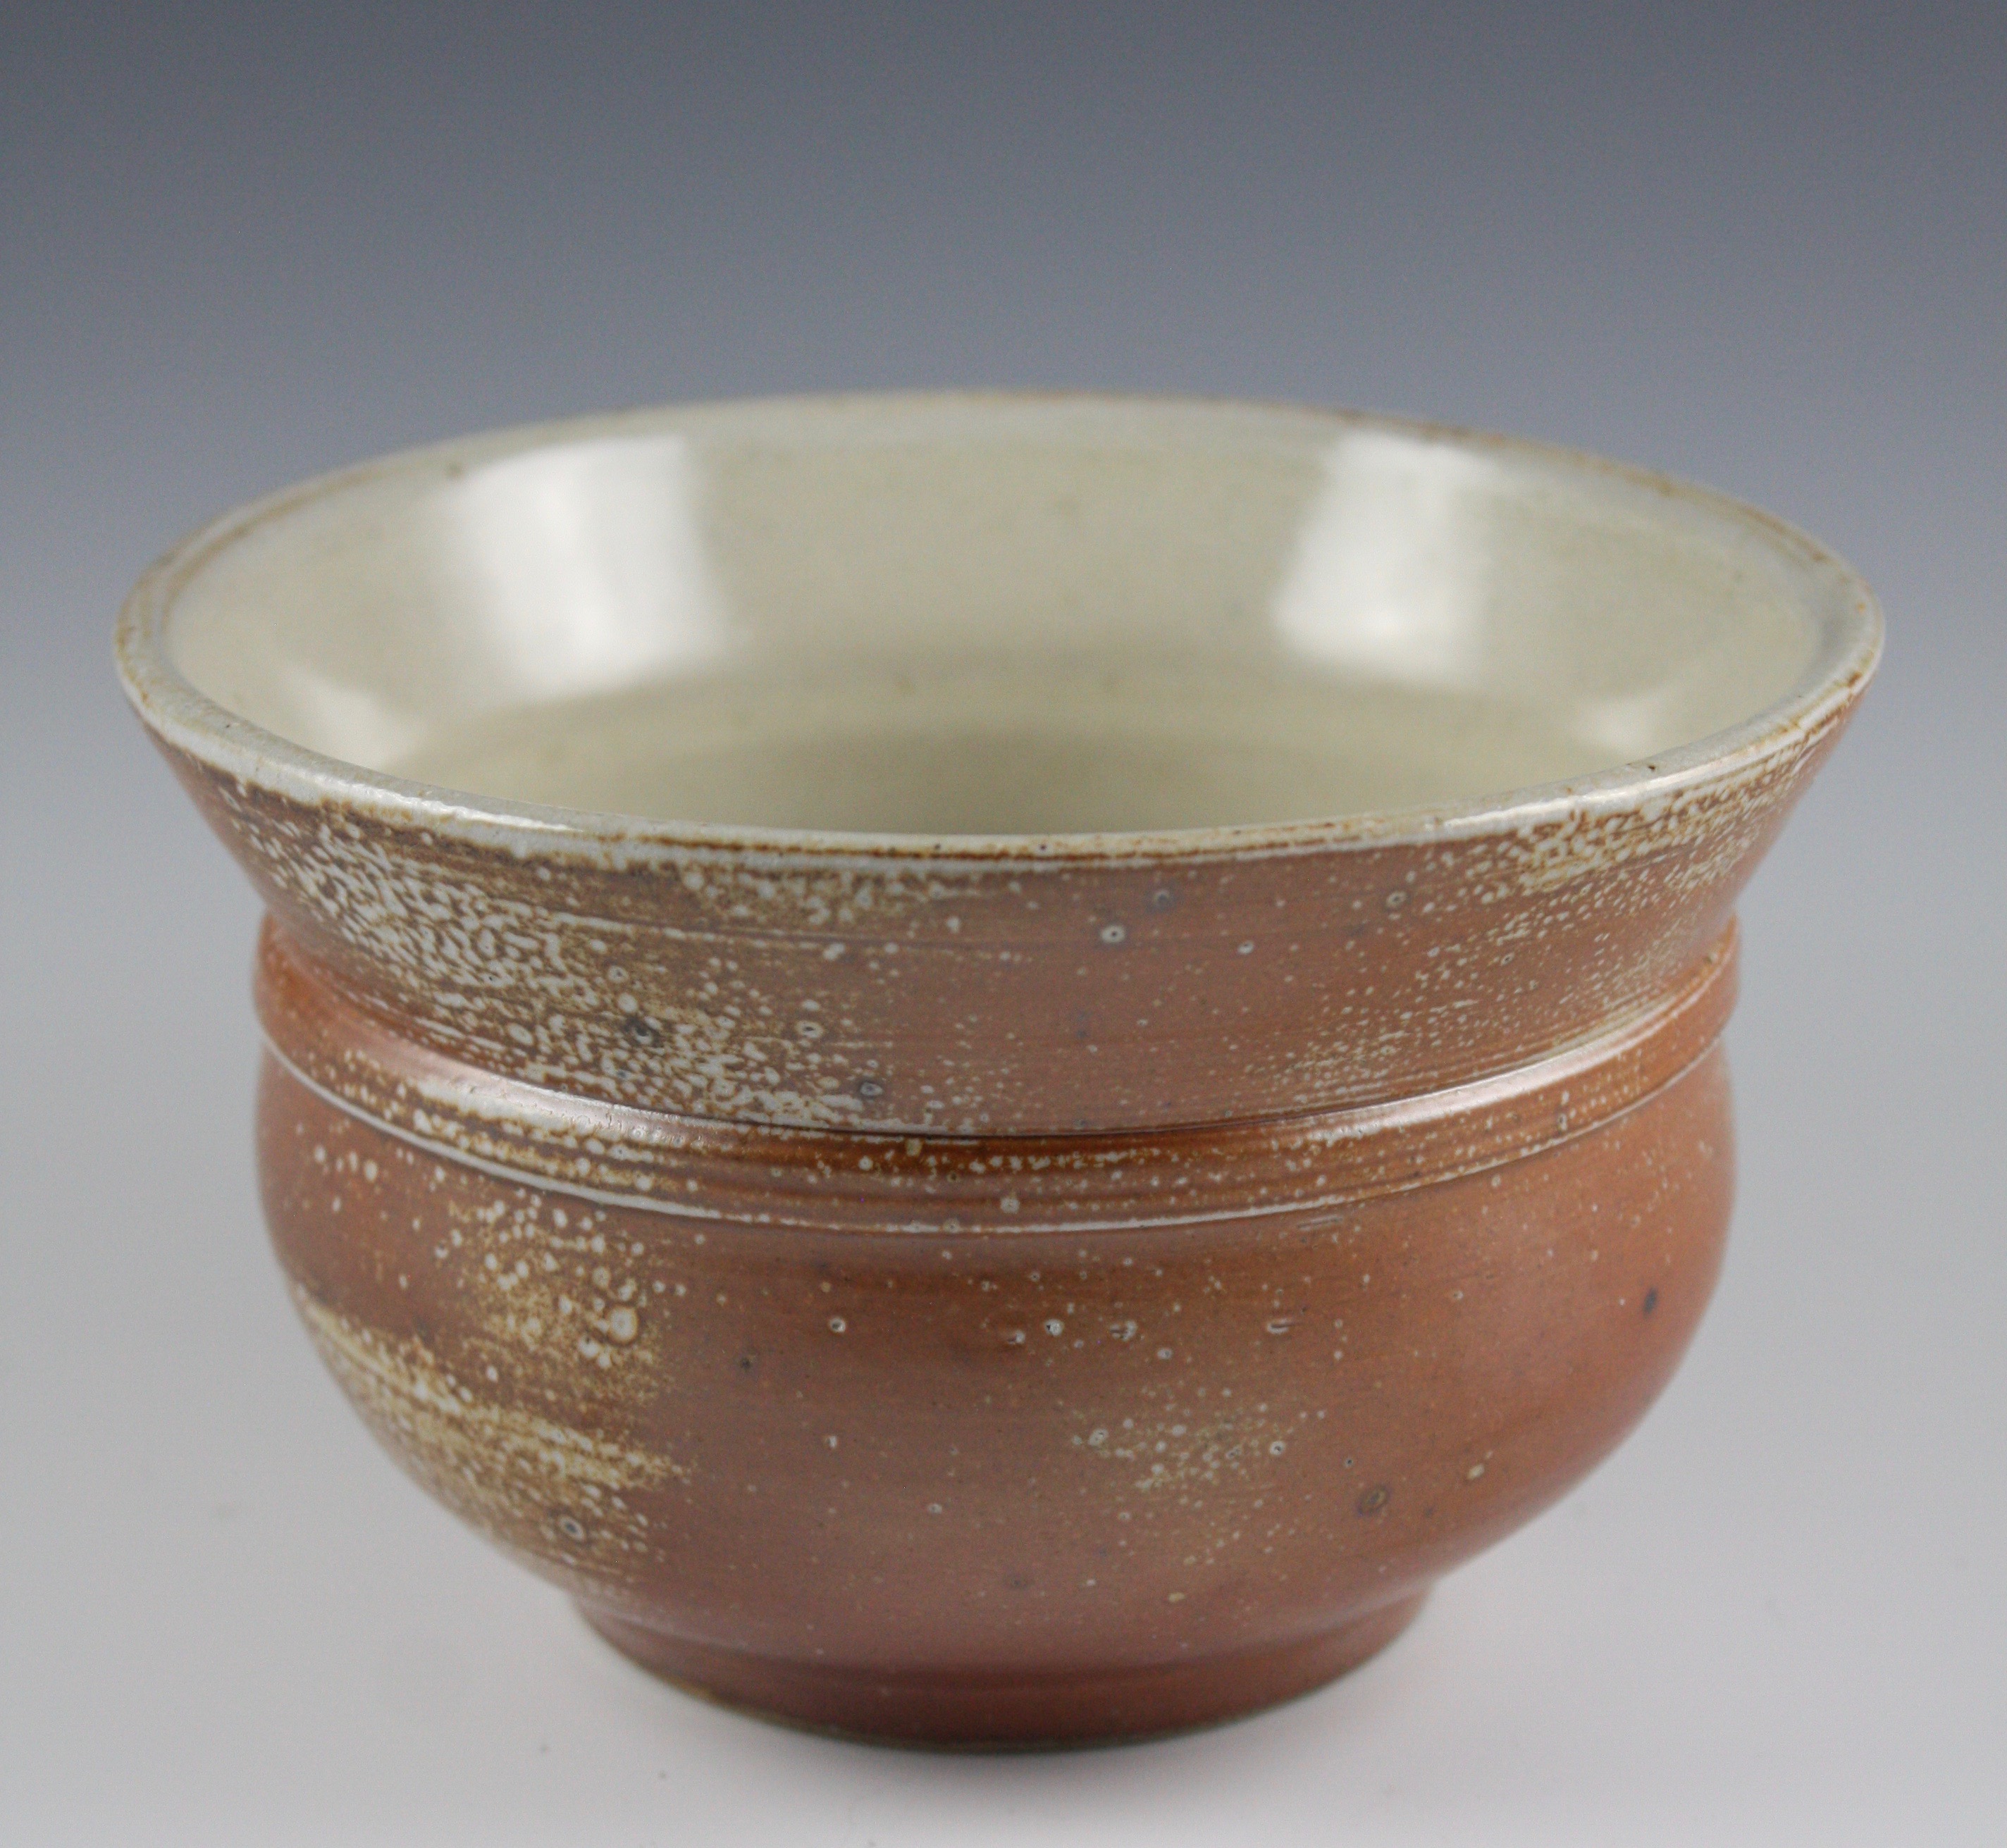 Spittoon-Shaped Bowl #24